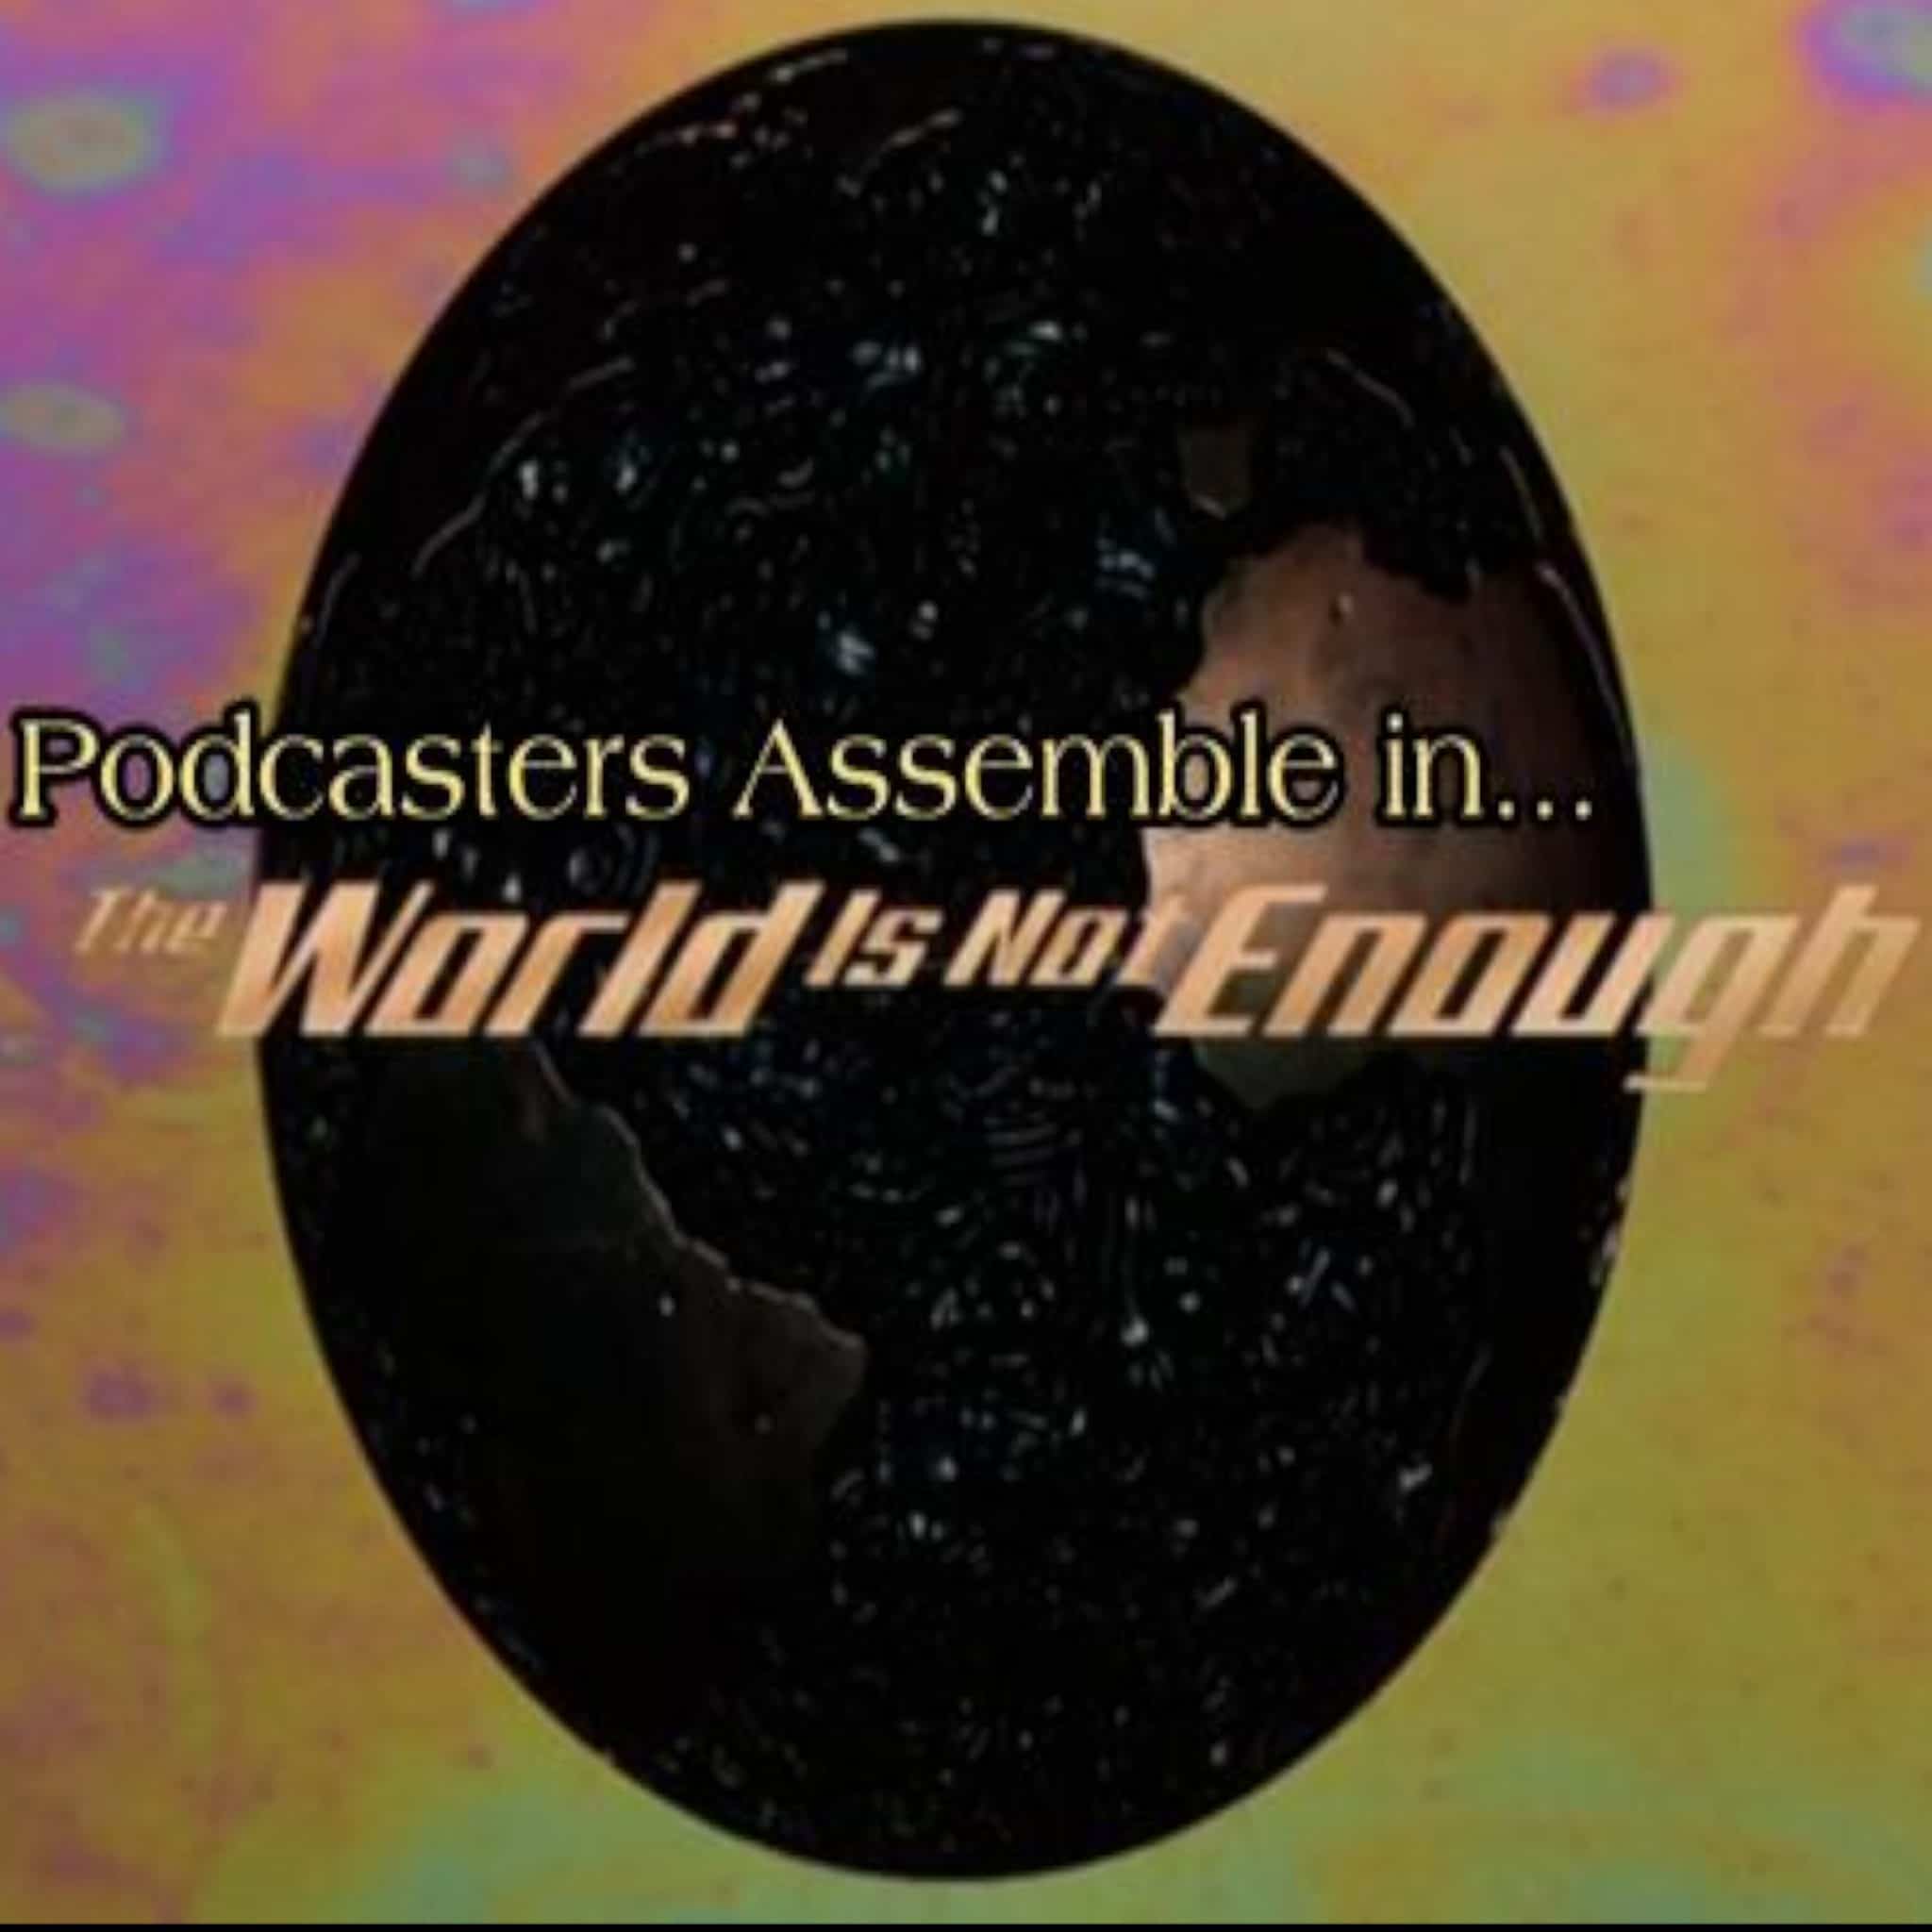 The World is Not Enough (1999)